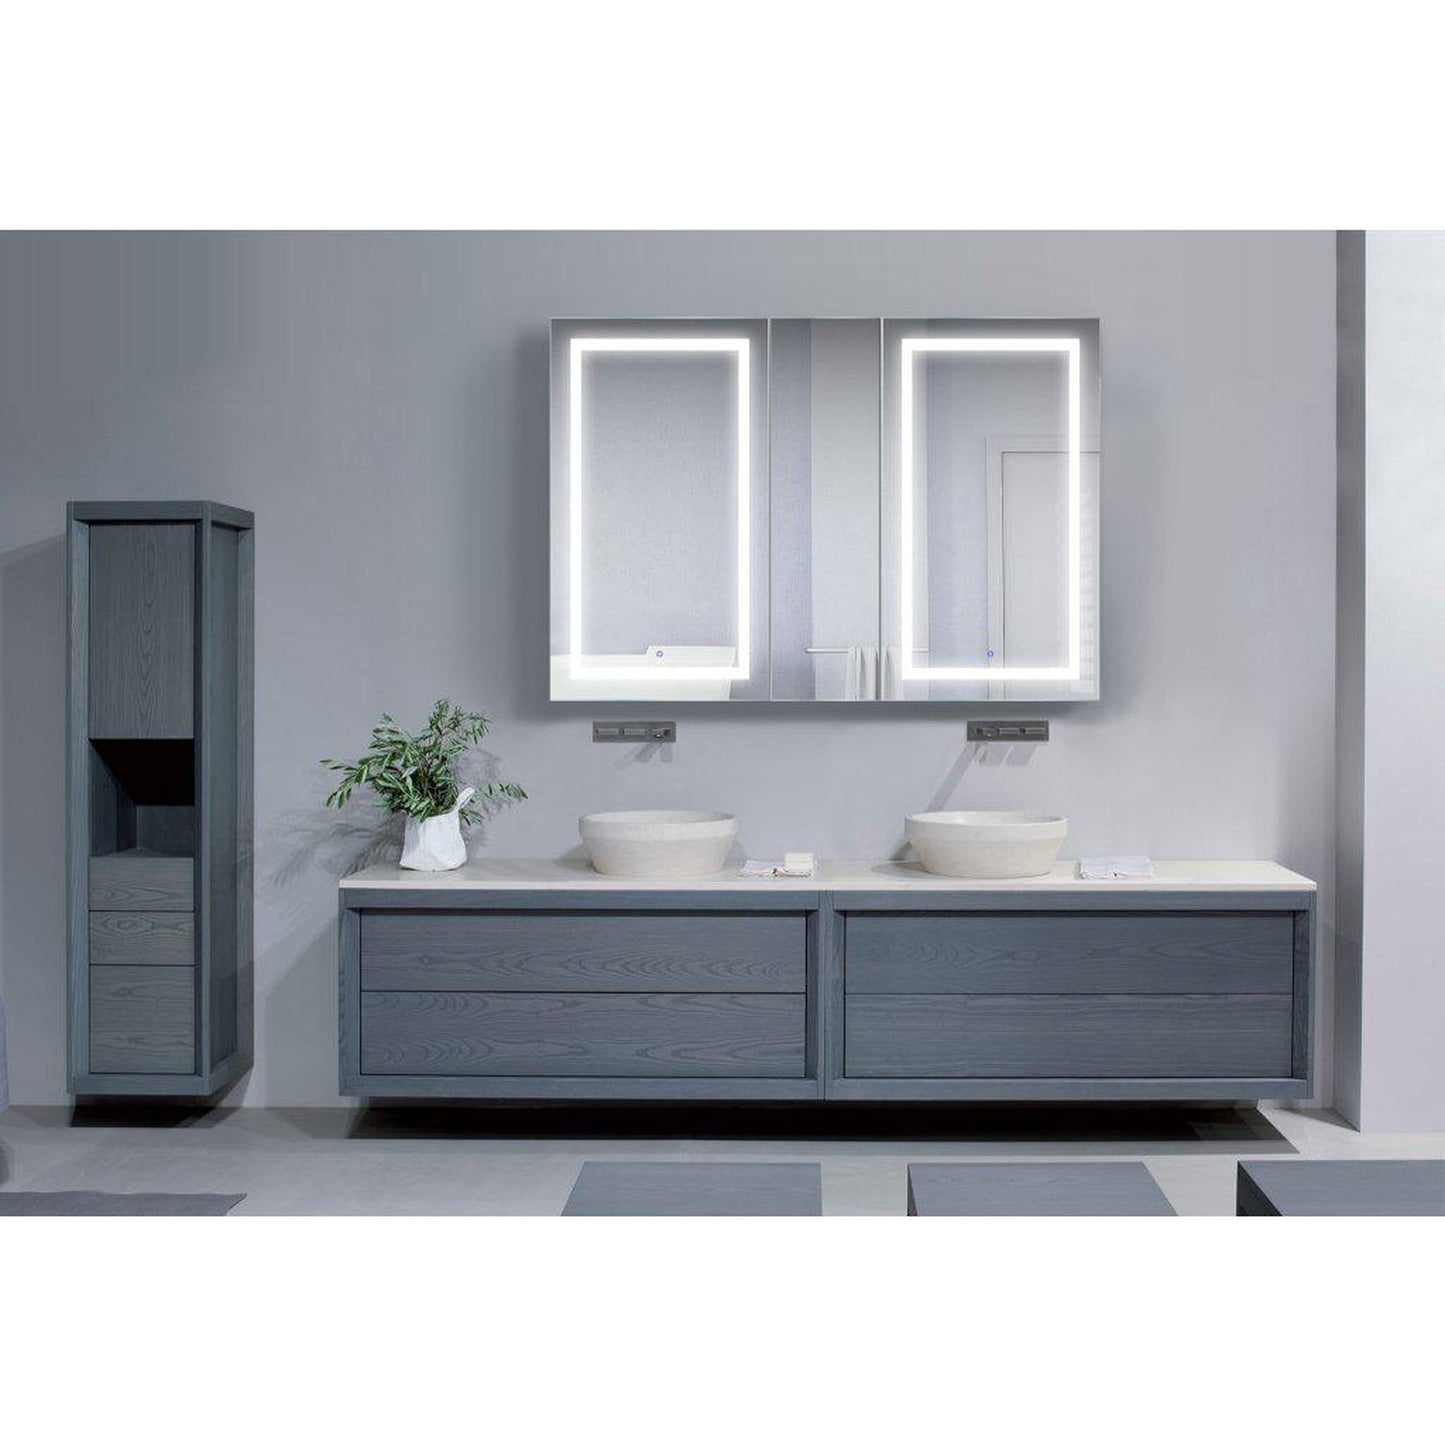 Krugg Reflections Svange 60" x 42" 5000K Double Left-Right-Right Opening Recessed/Surface-Mount Illuminated Silver Backed LED Medicine Cabinet Mirror With Built-in Defogger, Dimmer and Electrical Outlet